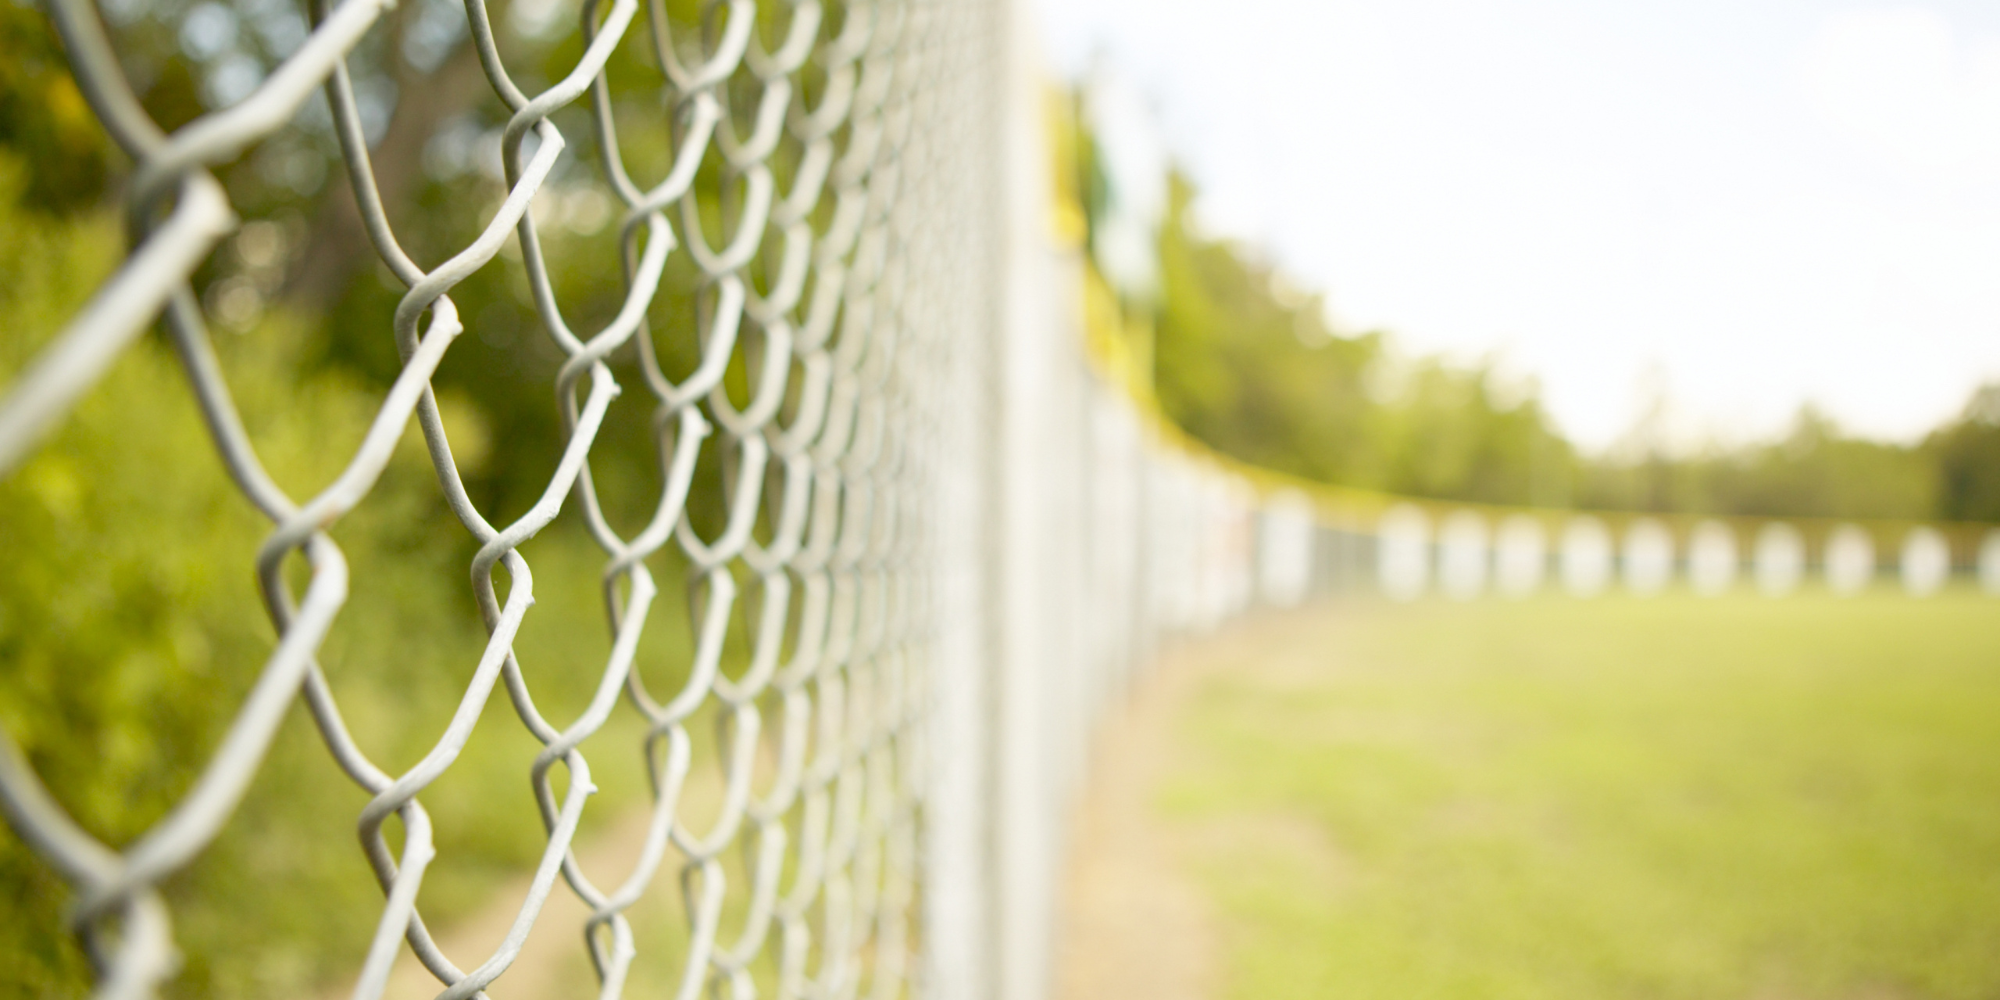 Silver chain link fence around a green park/baseball field